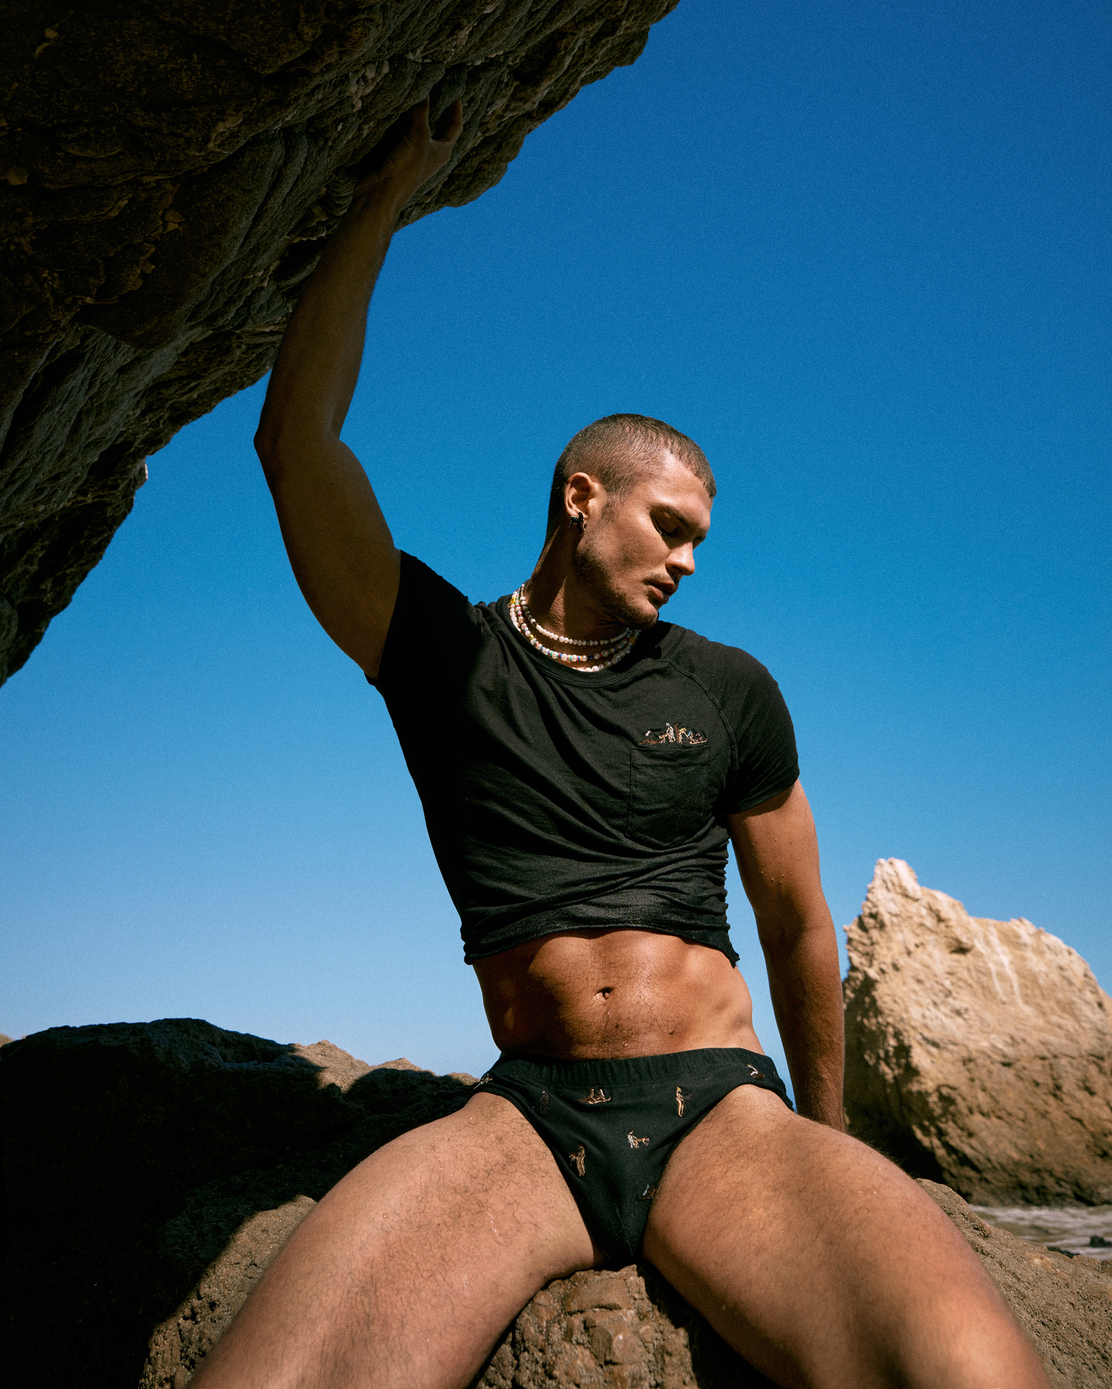  “Rock The Boat” Embroidered Raglan Tee & “Human Nature” Embroidered Swim Brief, BAJA EAST x C.BONZ  / necklaces, Brandon’s own